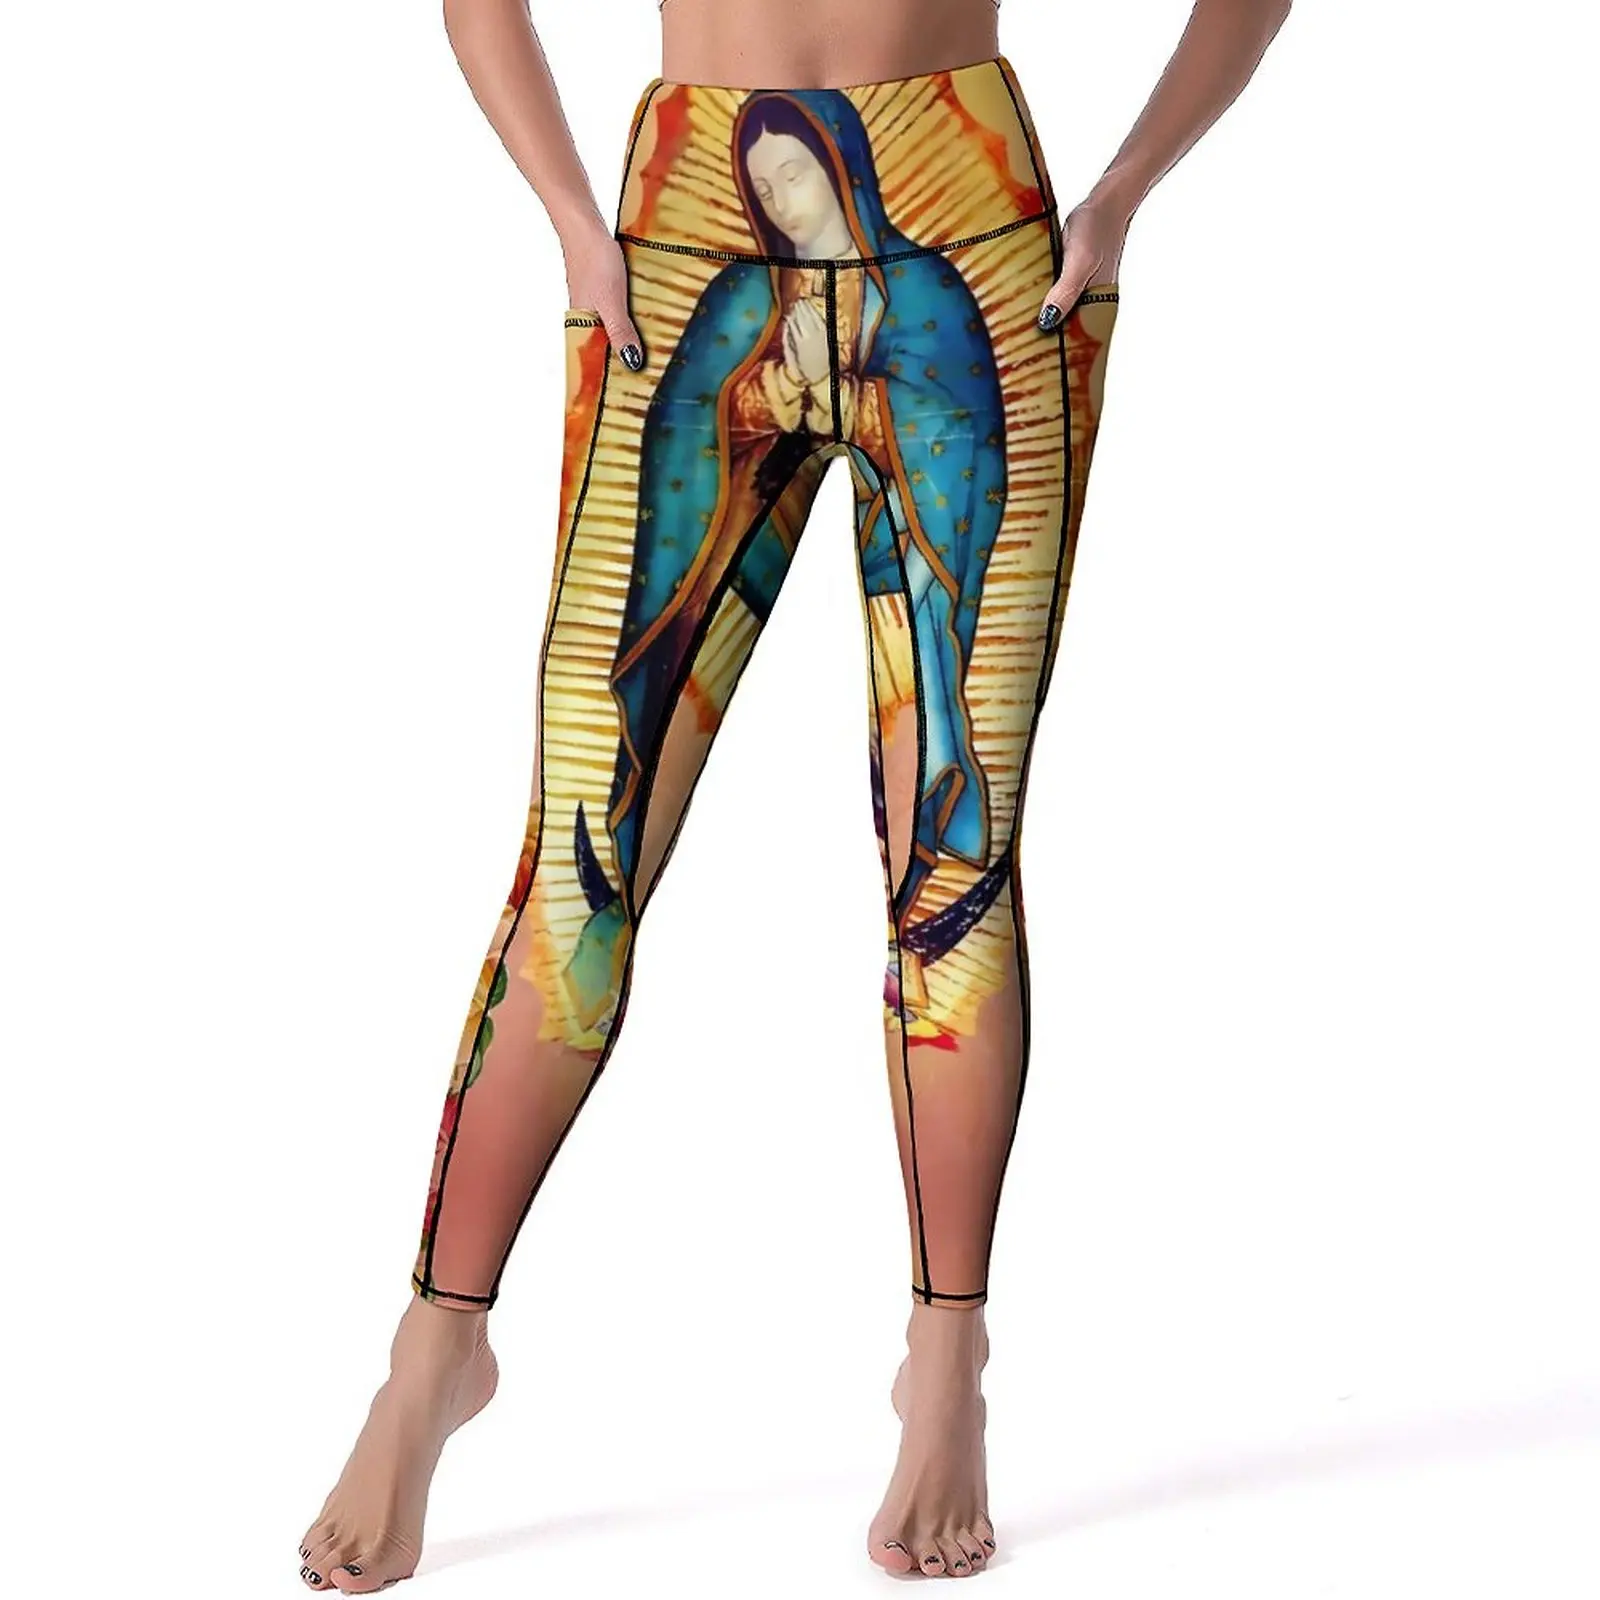 

Our Lady of Guadalupe And Roses Leggings Sexy Virgin Mary High Waist Yoga Pants Quick-Dry Leggins Women Workout Sports Tights